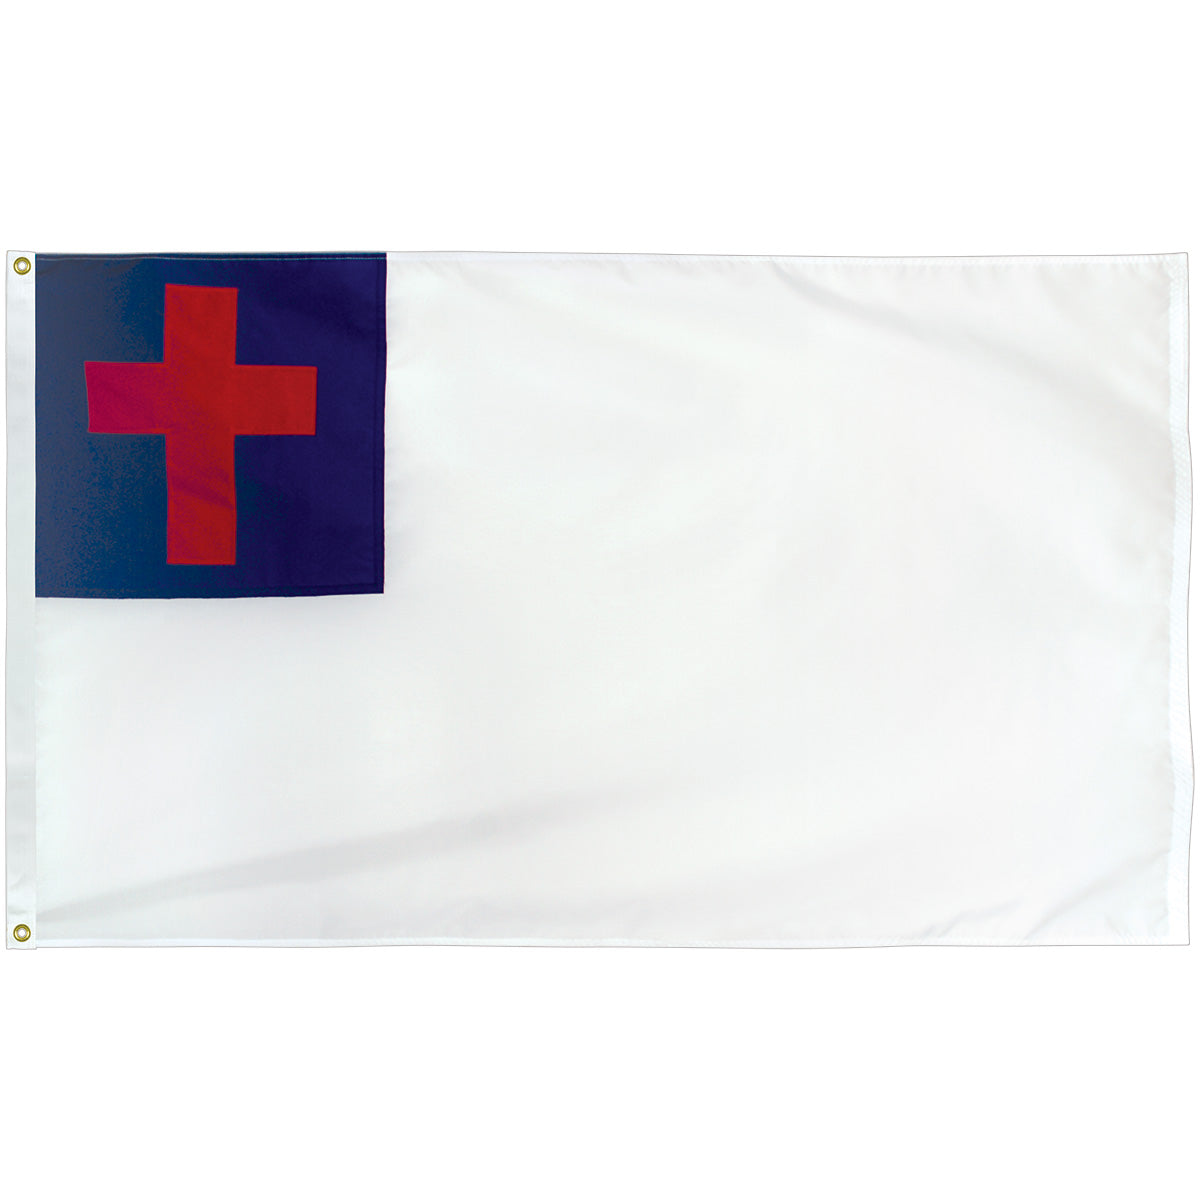 Christian Flag - Valley Forge